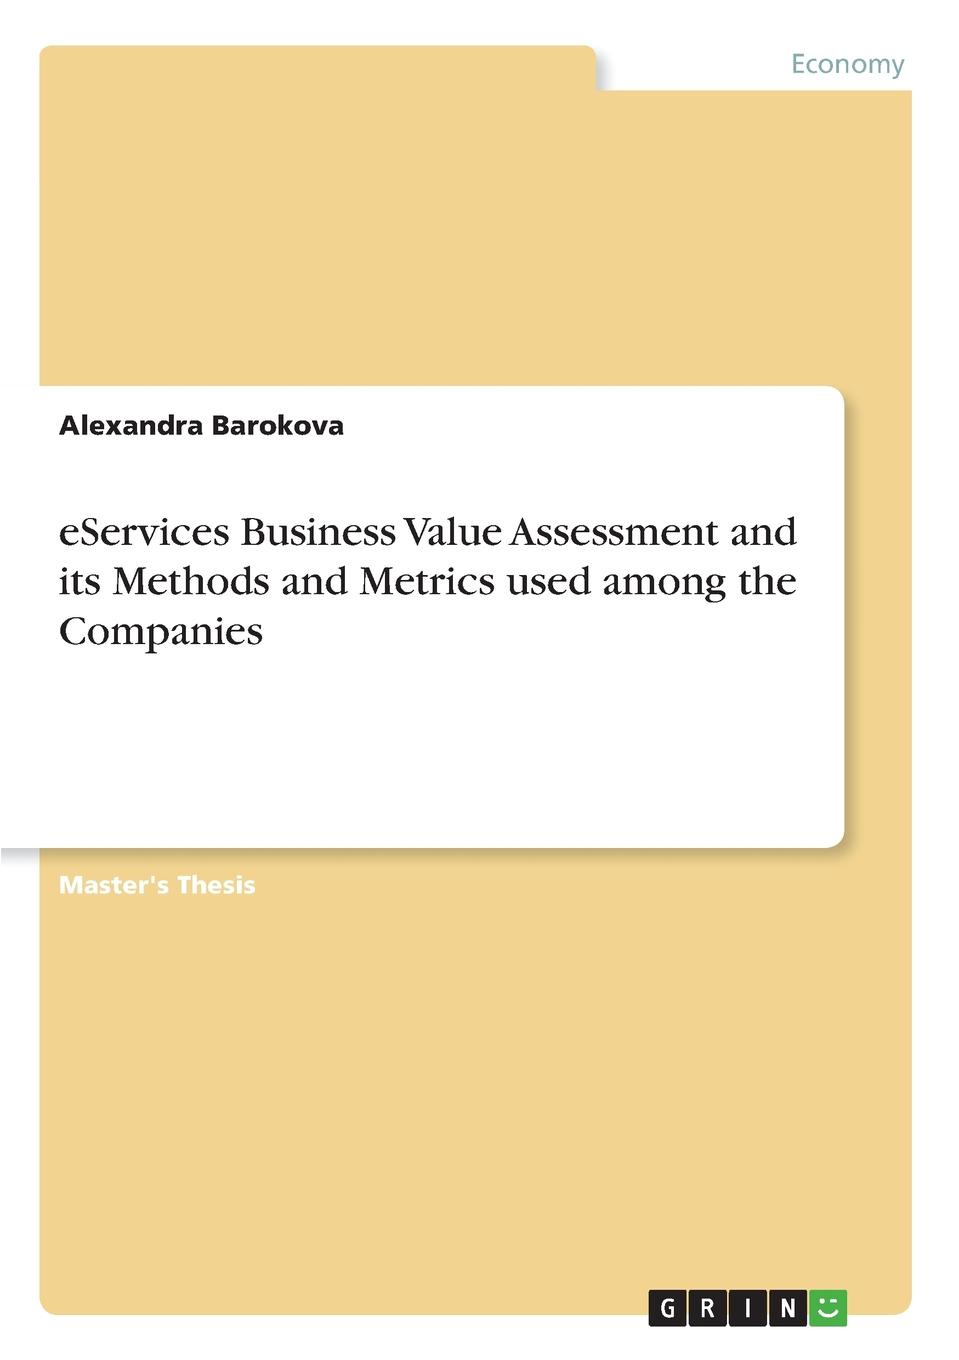 eServices Business Value Assessment and its Methods and Metrics used among the Companies